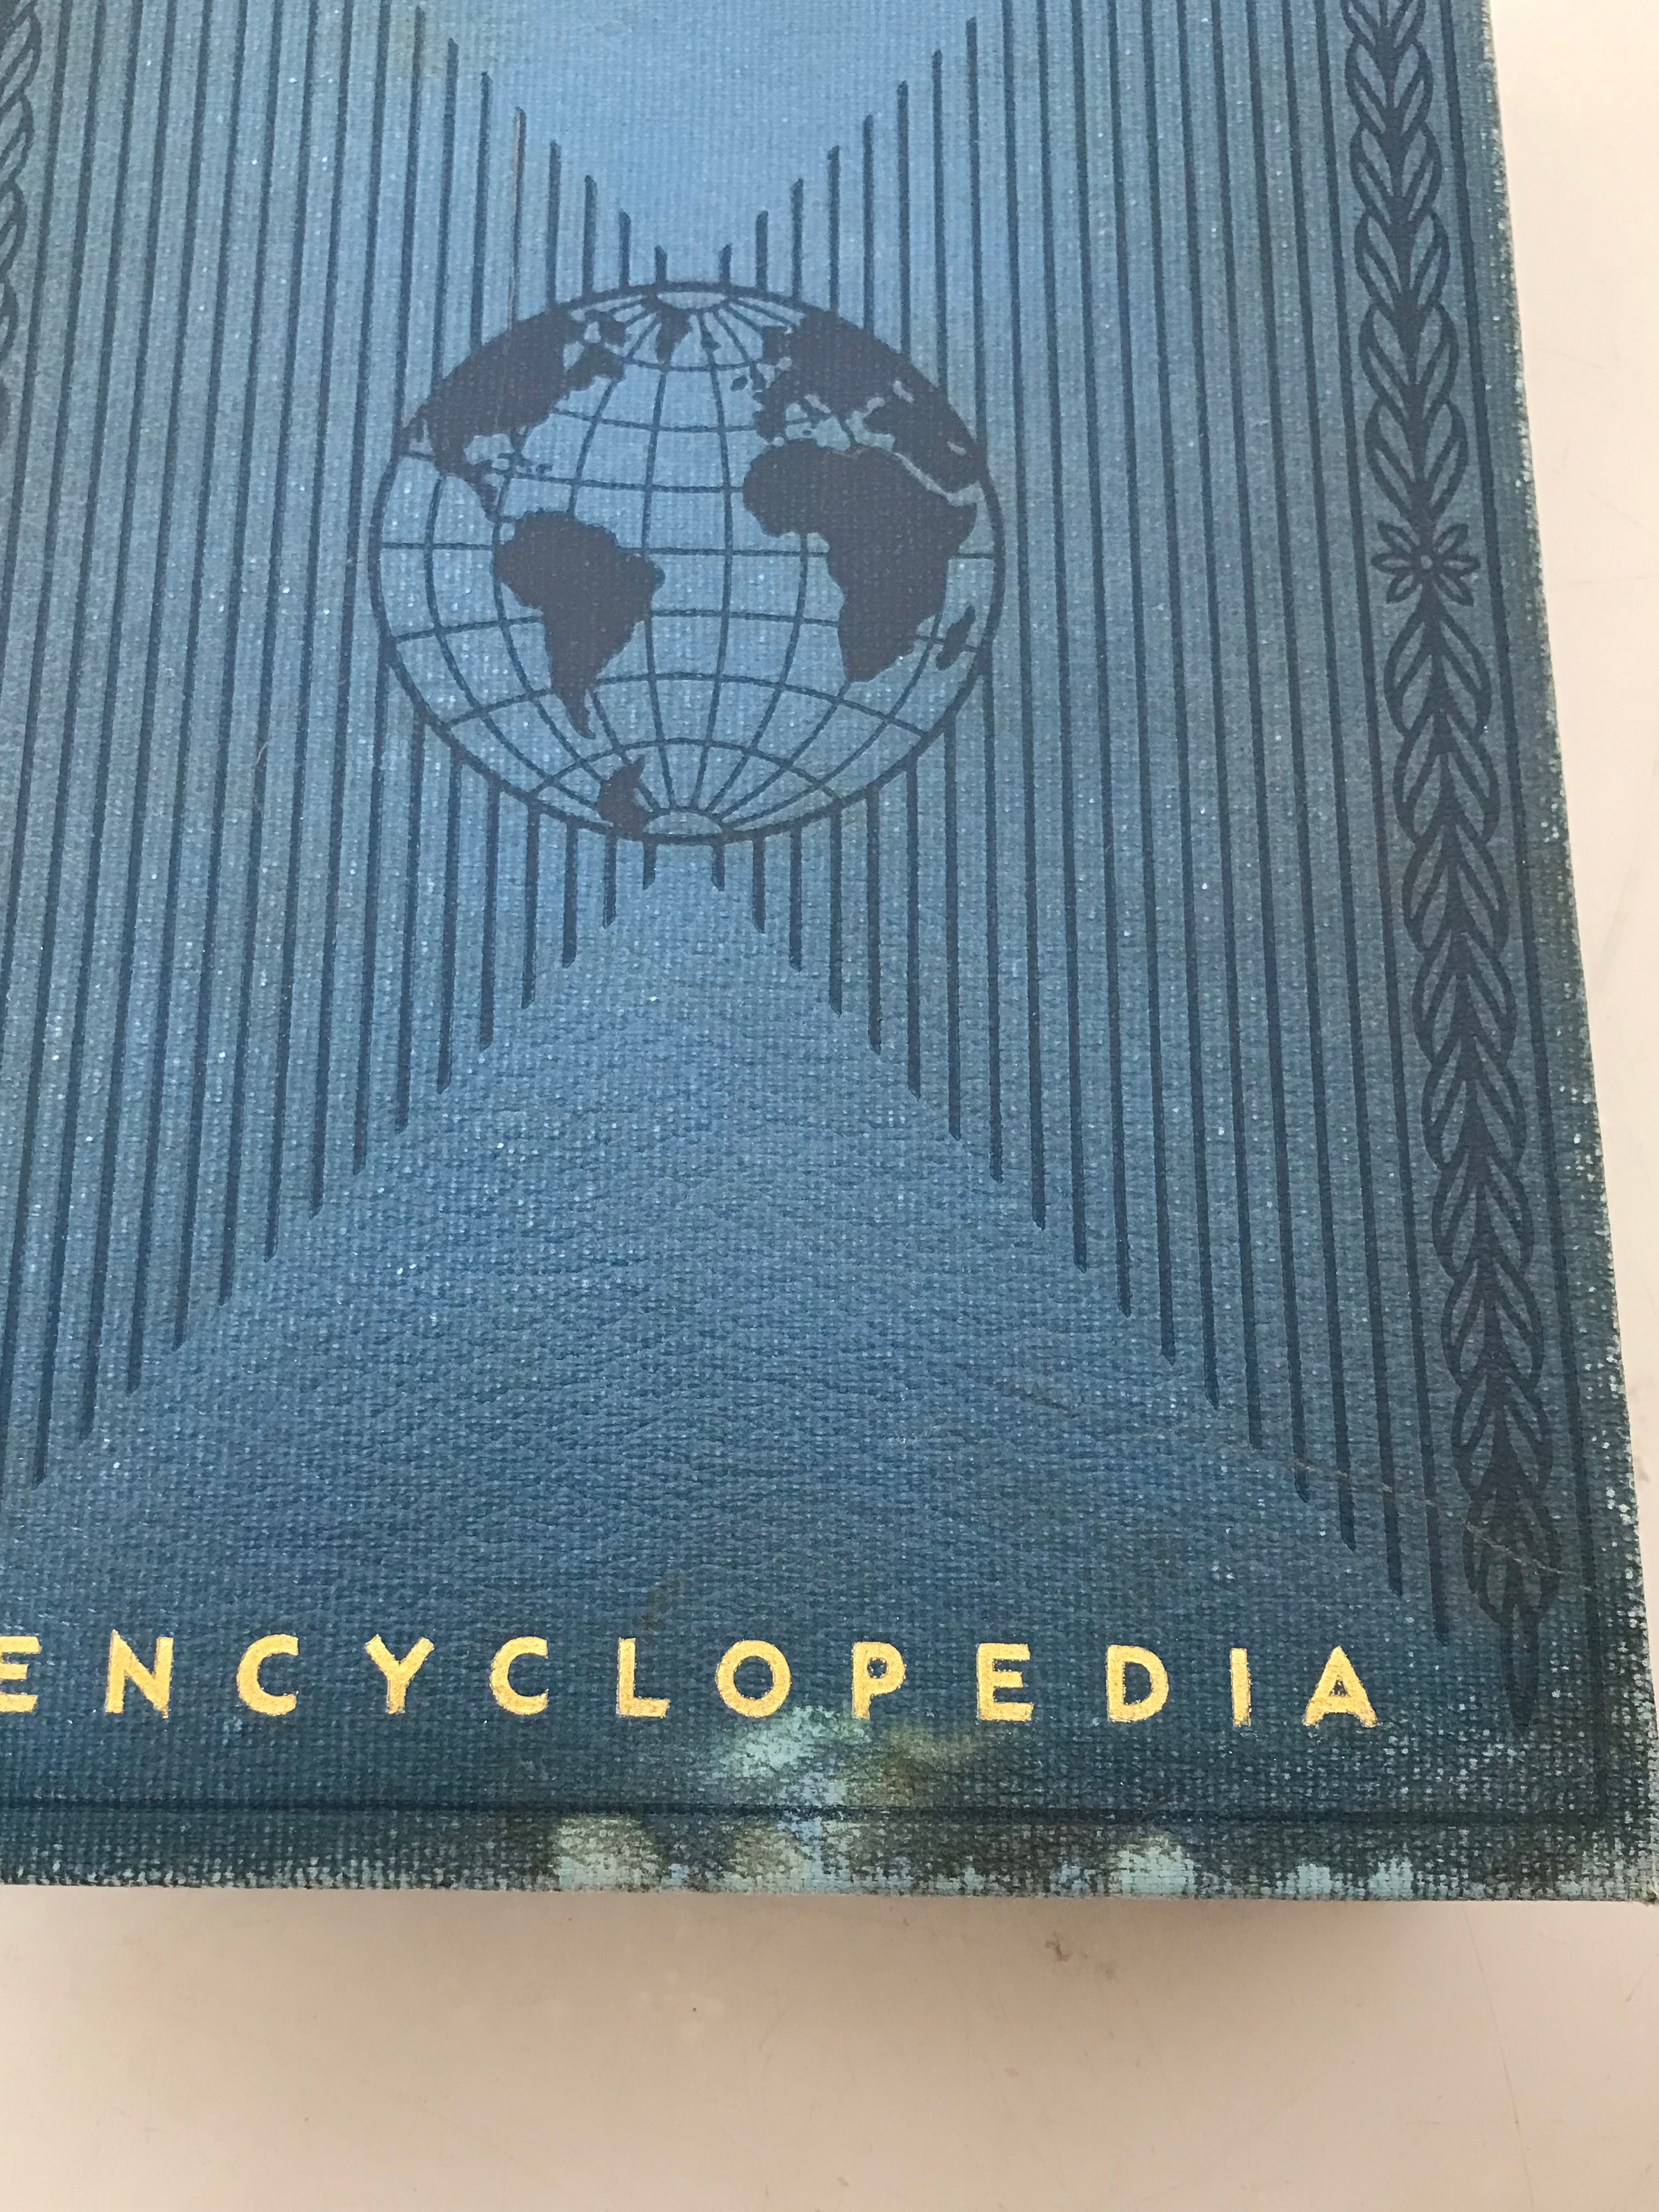 The World Book Encyclopedia 1930 Volumes 2-12 with Guide